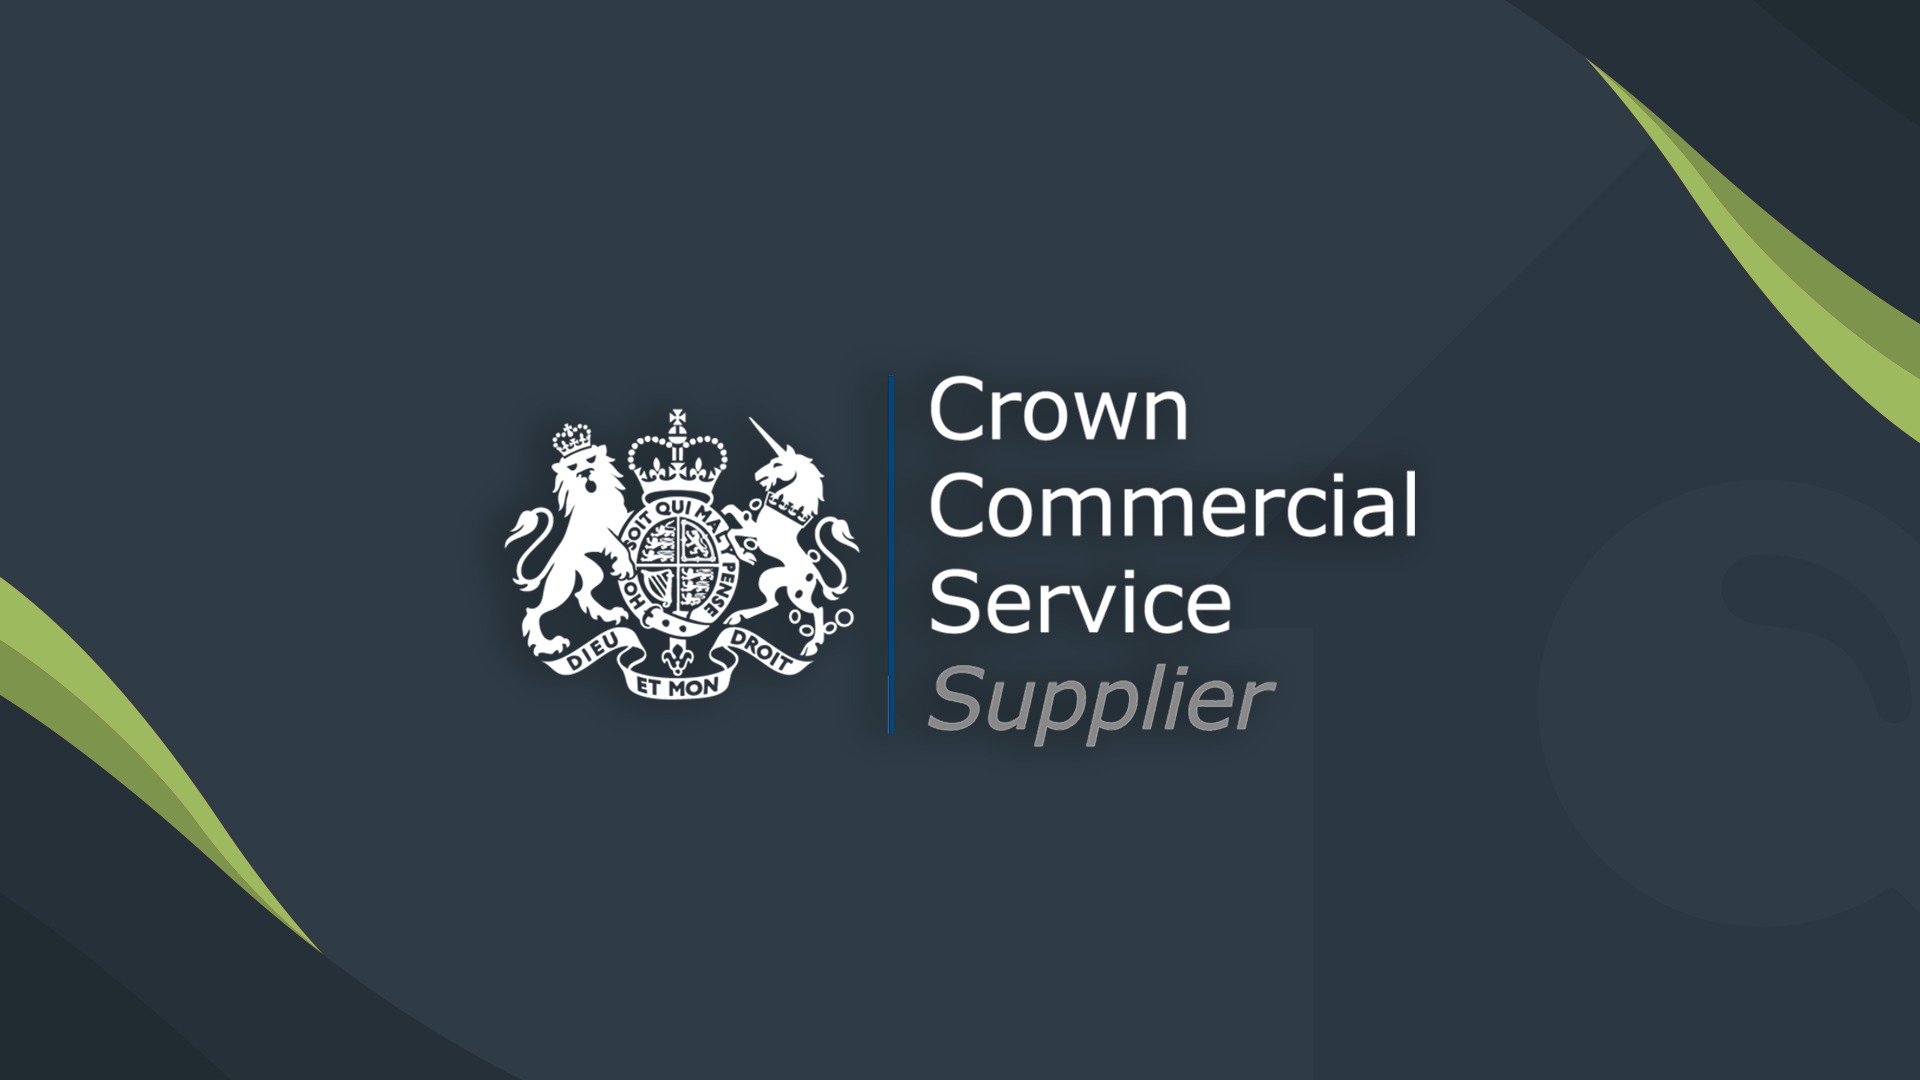 Property Inspect becomes an approved Crown Commercial Service solution provider